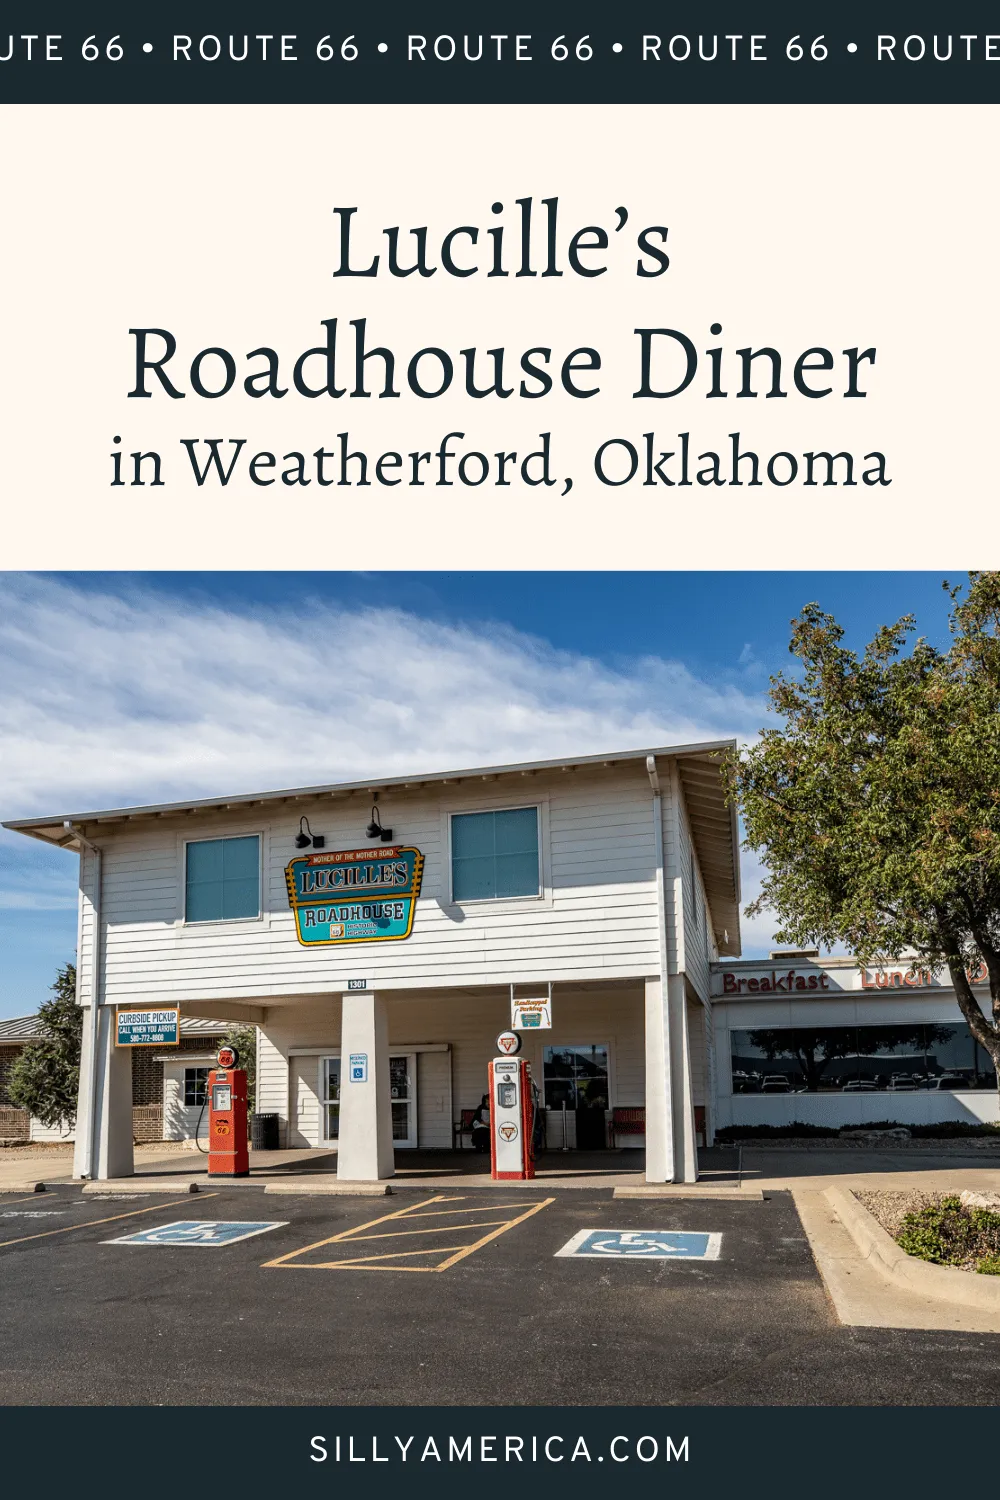 Lucille's Roadhouse Diner in Weatherford, Oklahoma is a Route 66 themed restaurant that pays homage to one of the most beloved stops on the Mother Road. Opened on Route 66 in 2006, it's been serving up delicious breakfasts, lunches, and dinners with a side of history for over a decade.  #RoadTrips #RoadTripStop #Route66 #Route66RoadTrip #OklahomaRoute66 #Oklahoma #OklahomaRoadTrip #OklahomaRoadsideAttractions #RoadsideAttractions #RoadsideAttraction #RoadsideAmerica #RoadTrip